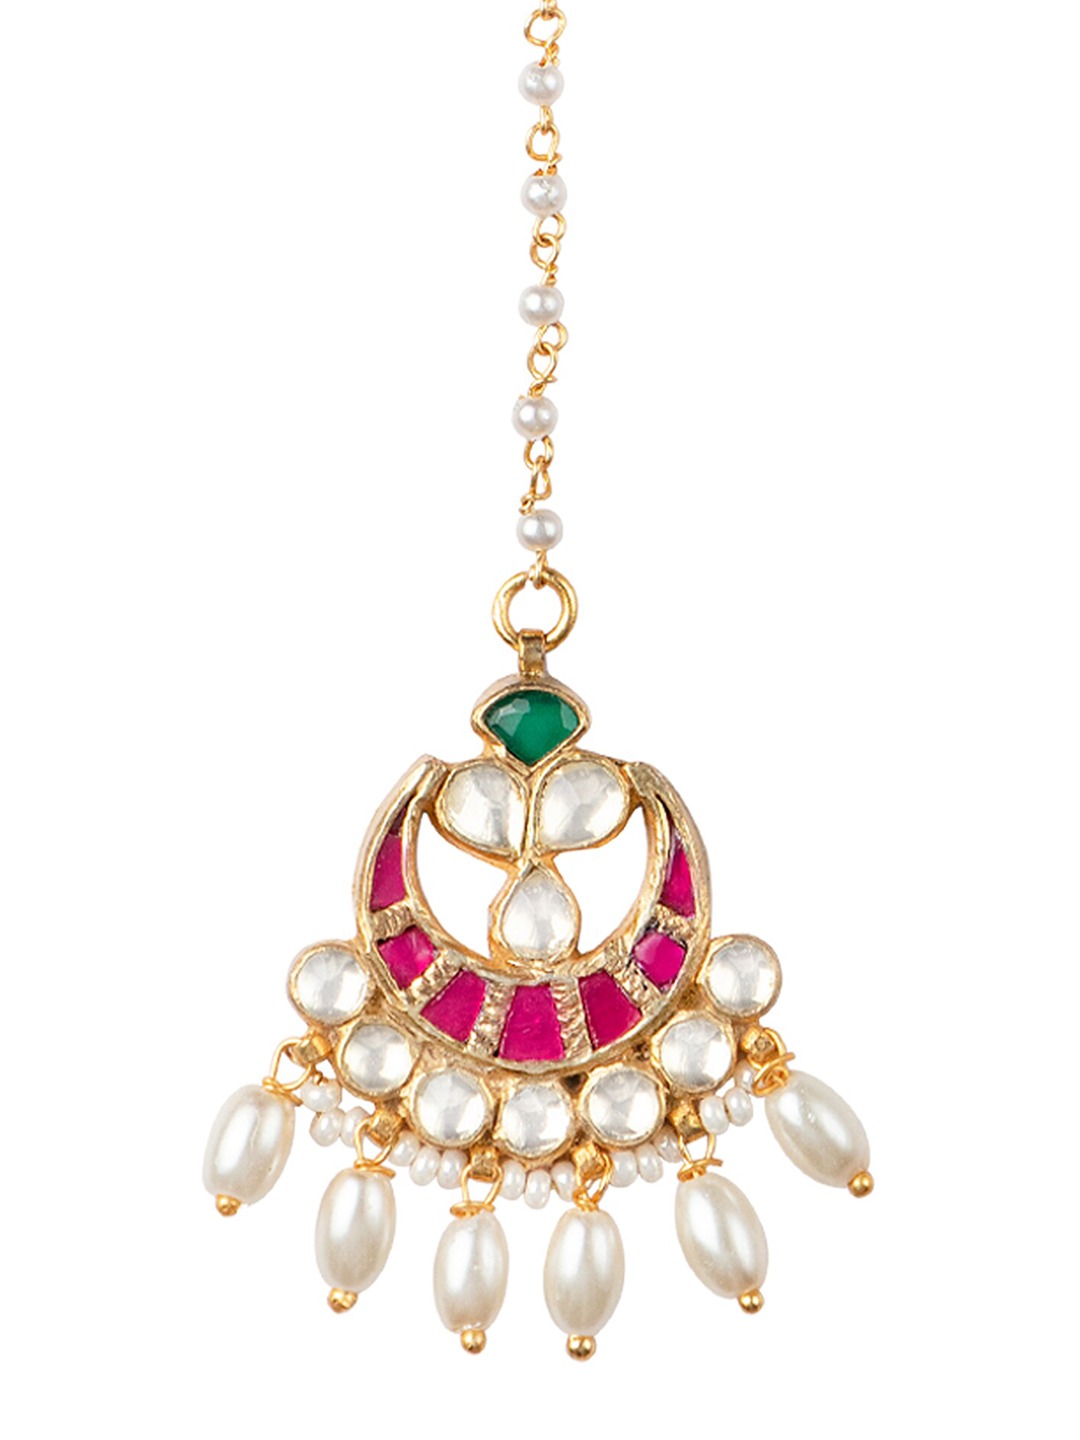 Women's 24K Gold-Plated White & Pink Kundan-Studded Pearl Embellished Handcrafted Maang Tikka - Morkanth